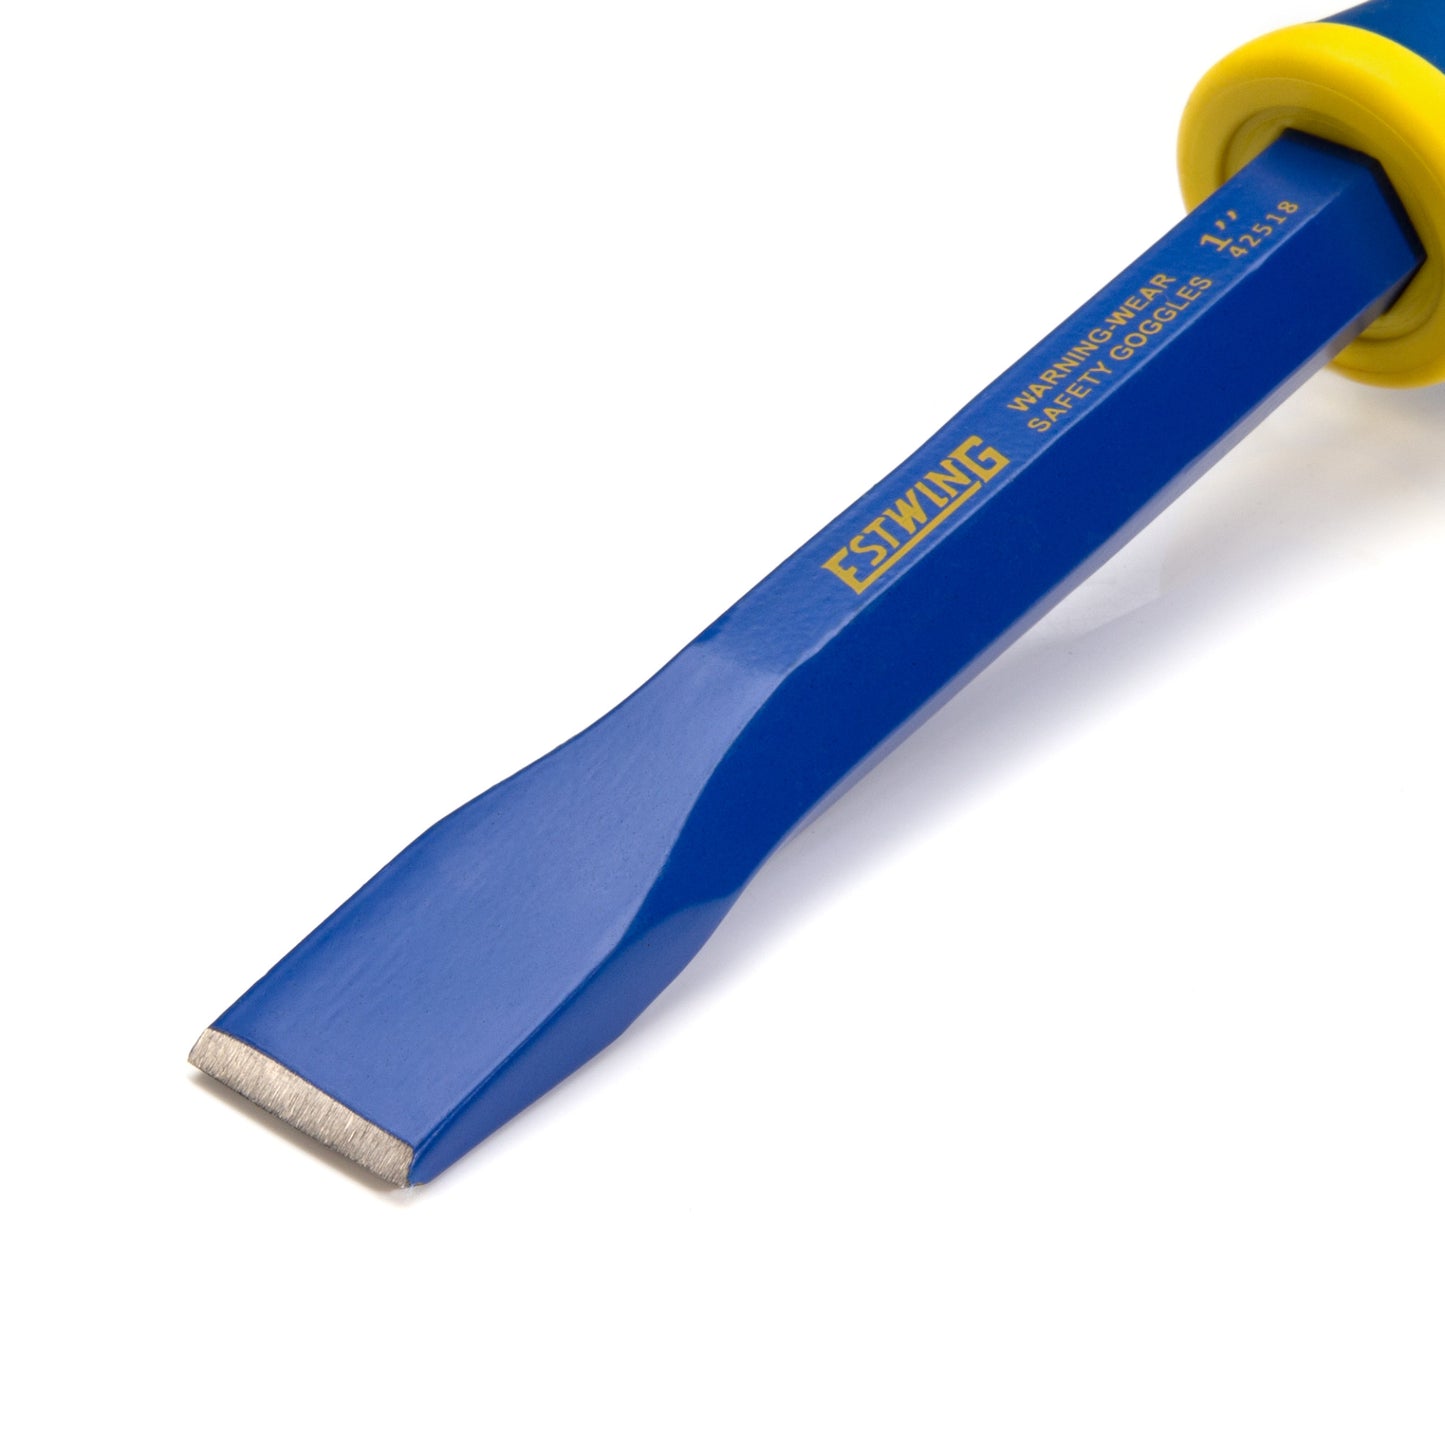 1-Inch Wide Cold Chisel with Grip Guard